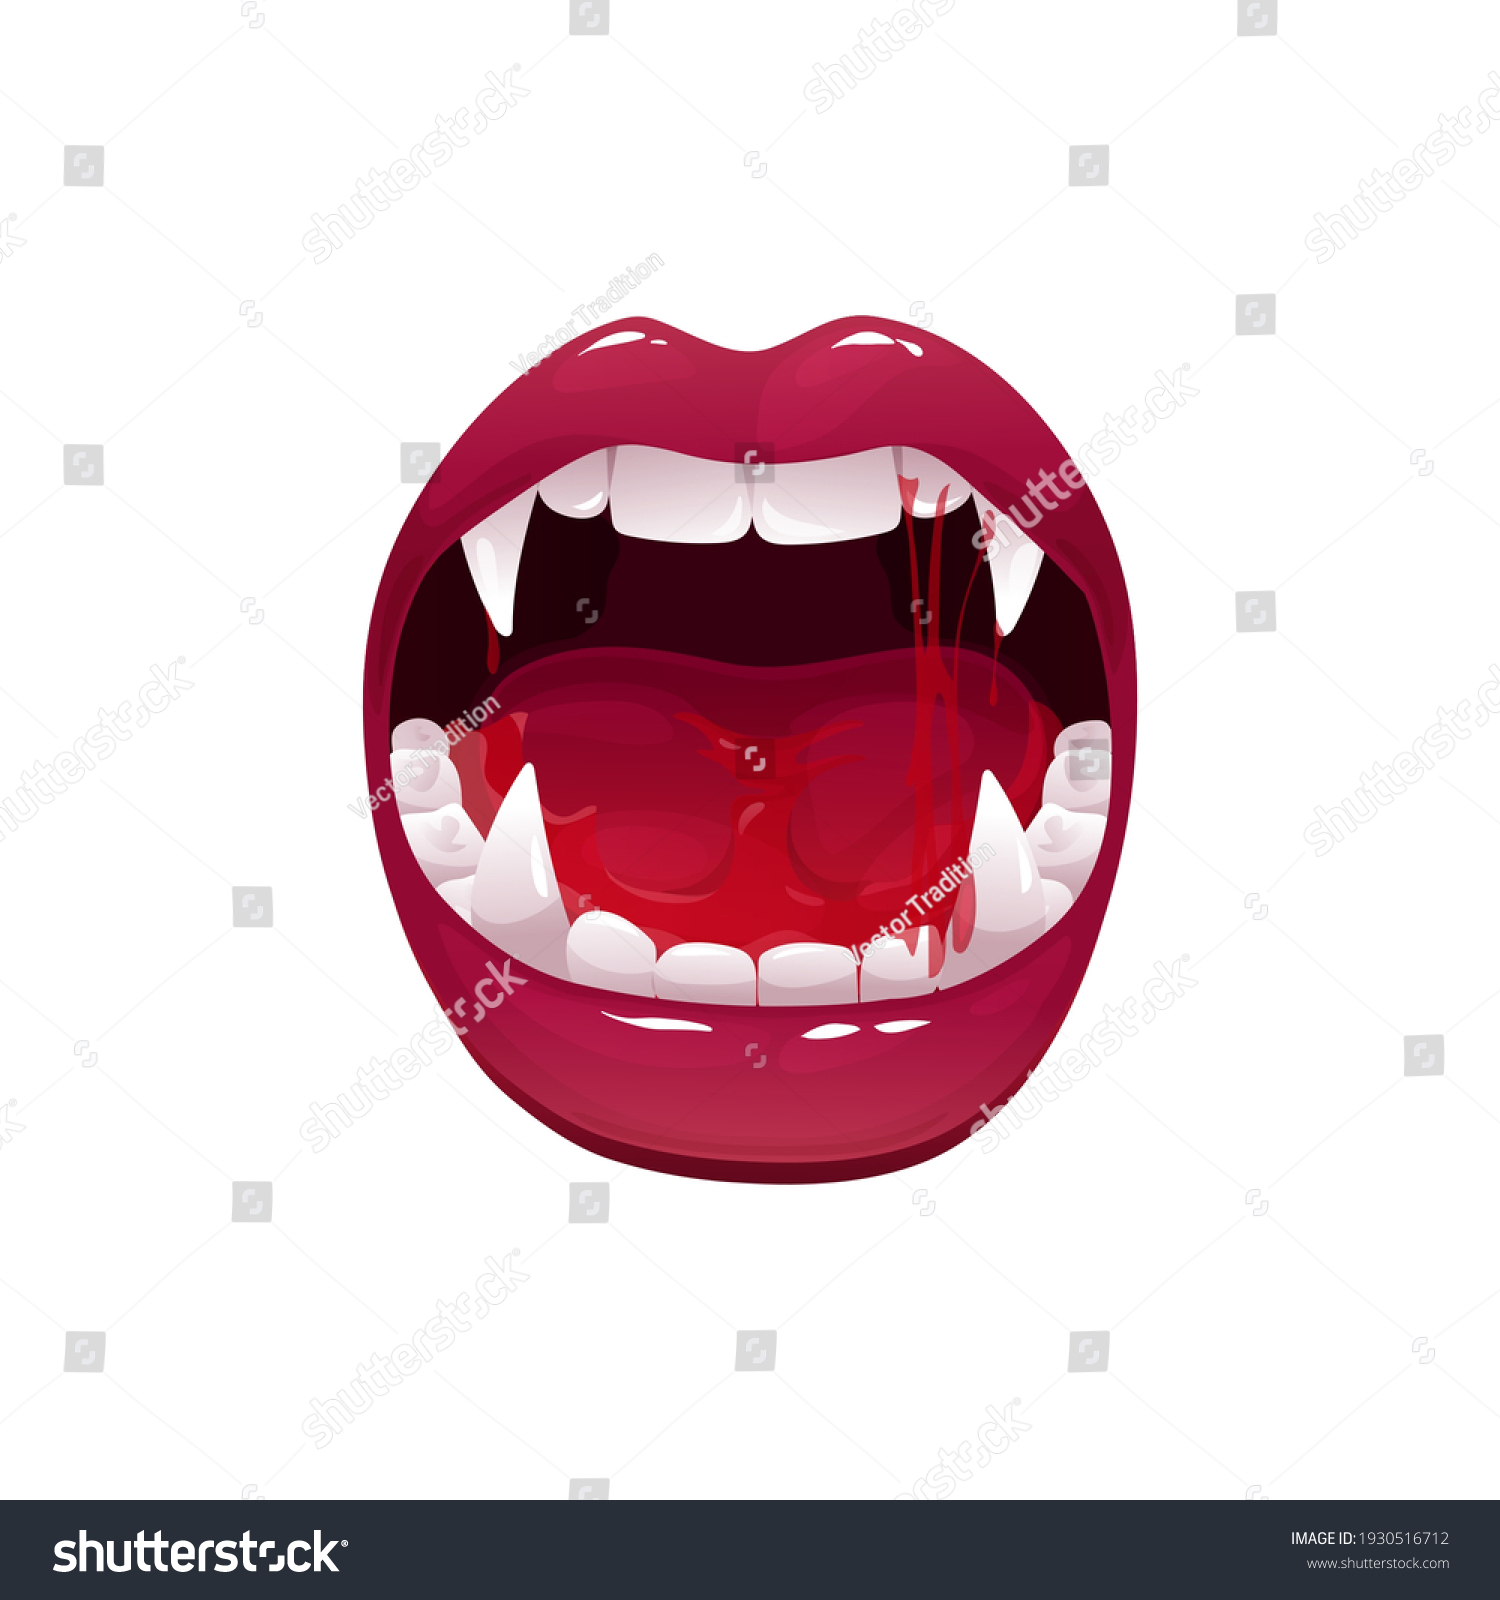 586,589 Opened mouth Images, Stock Photos & Vectors | Shutterstock